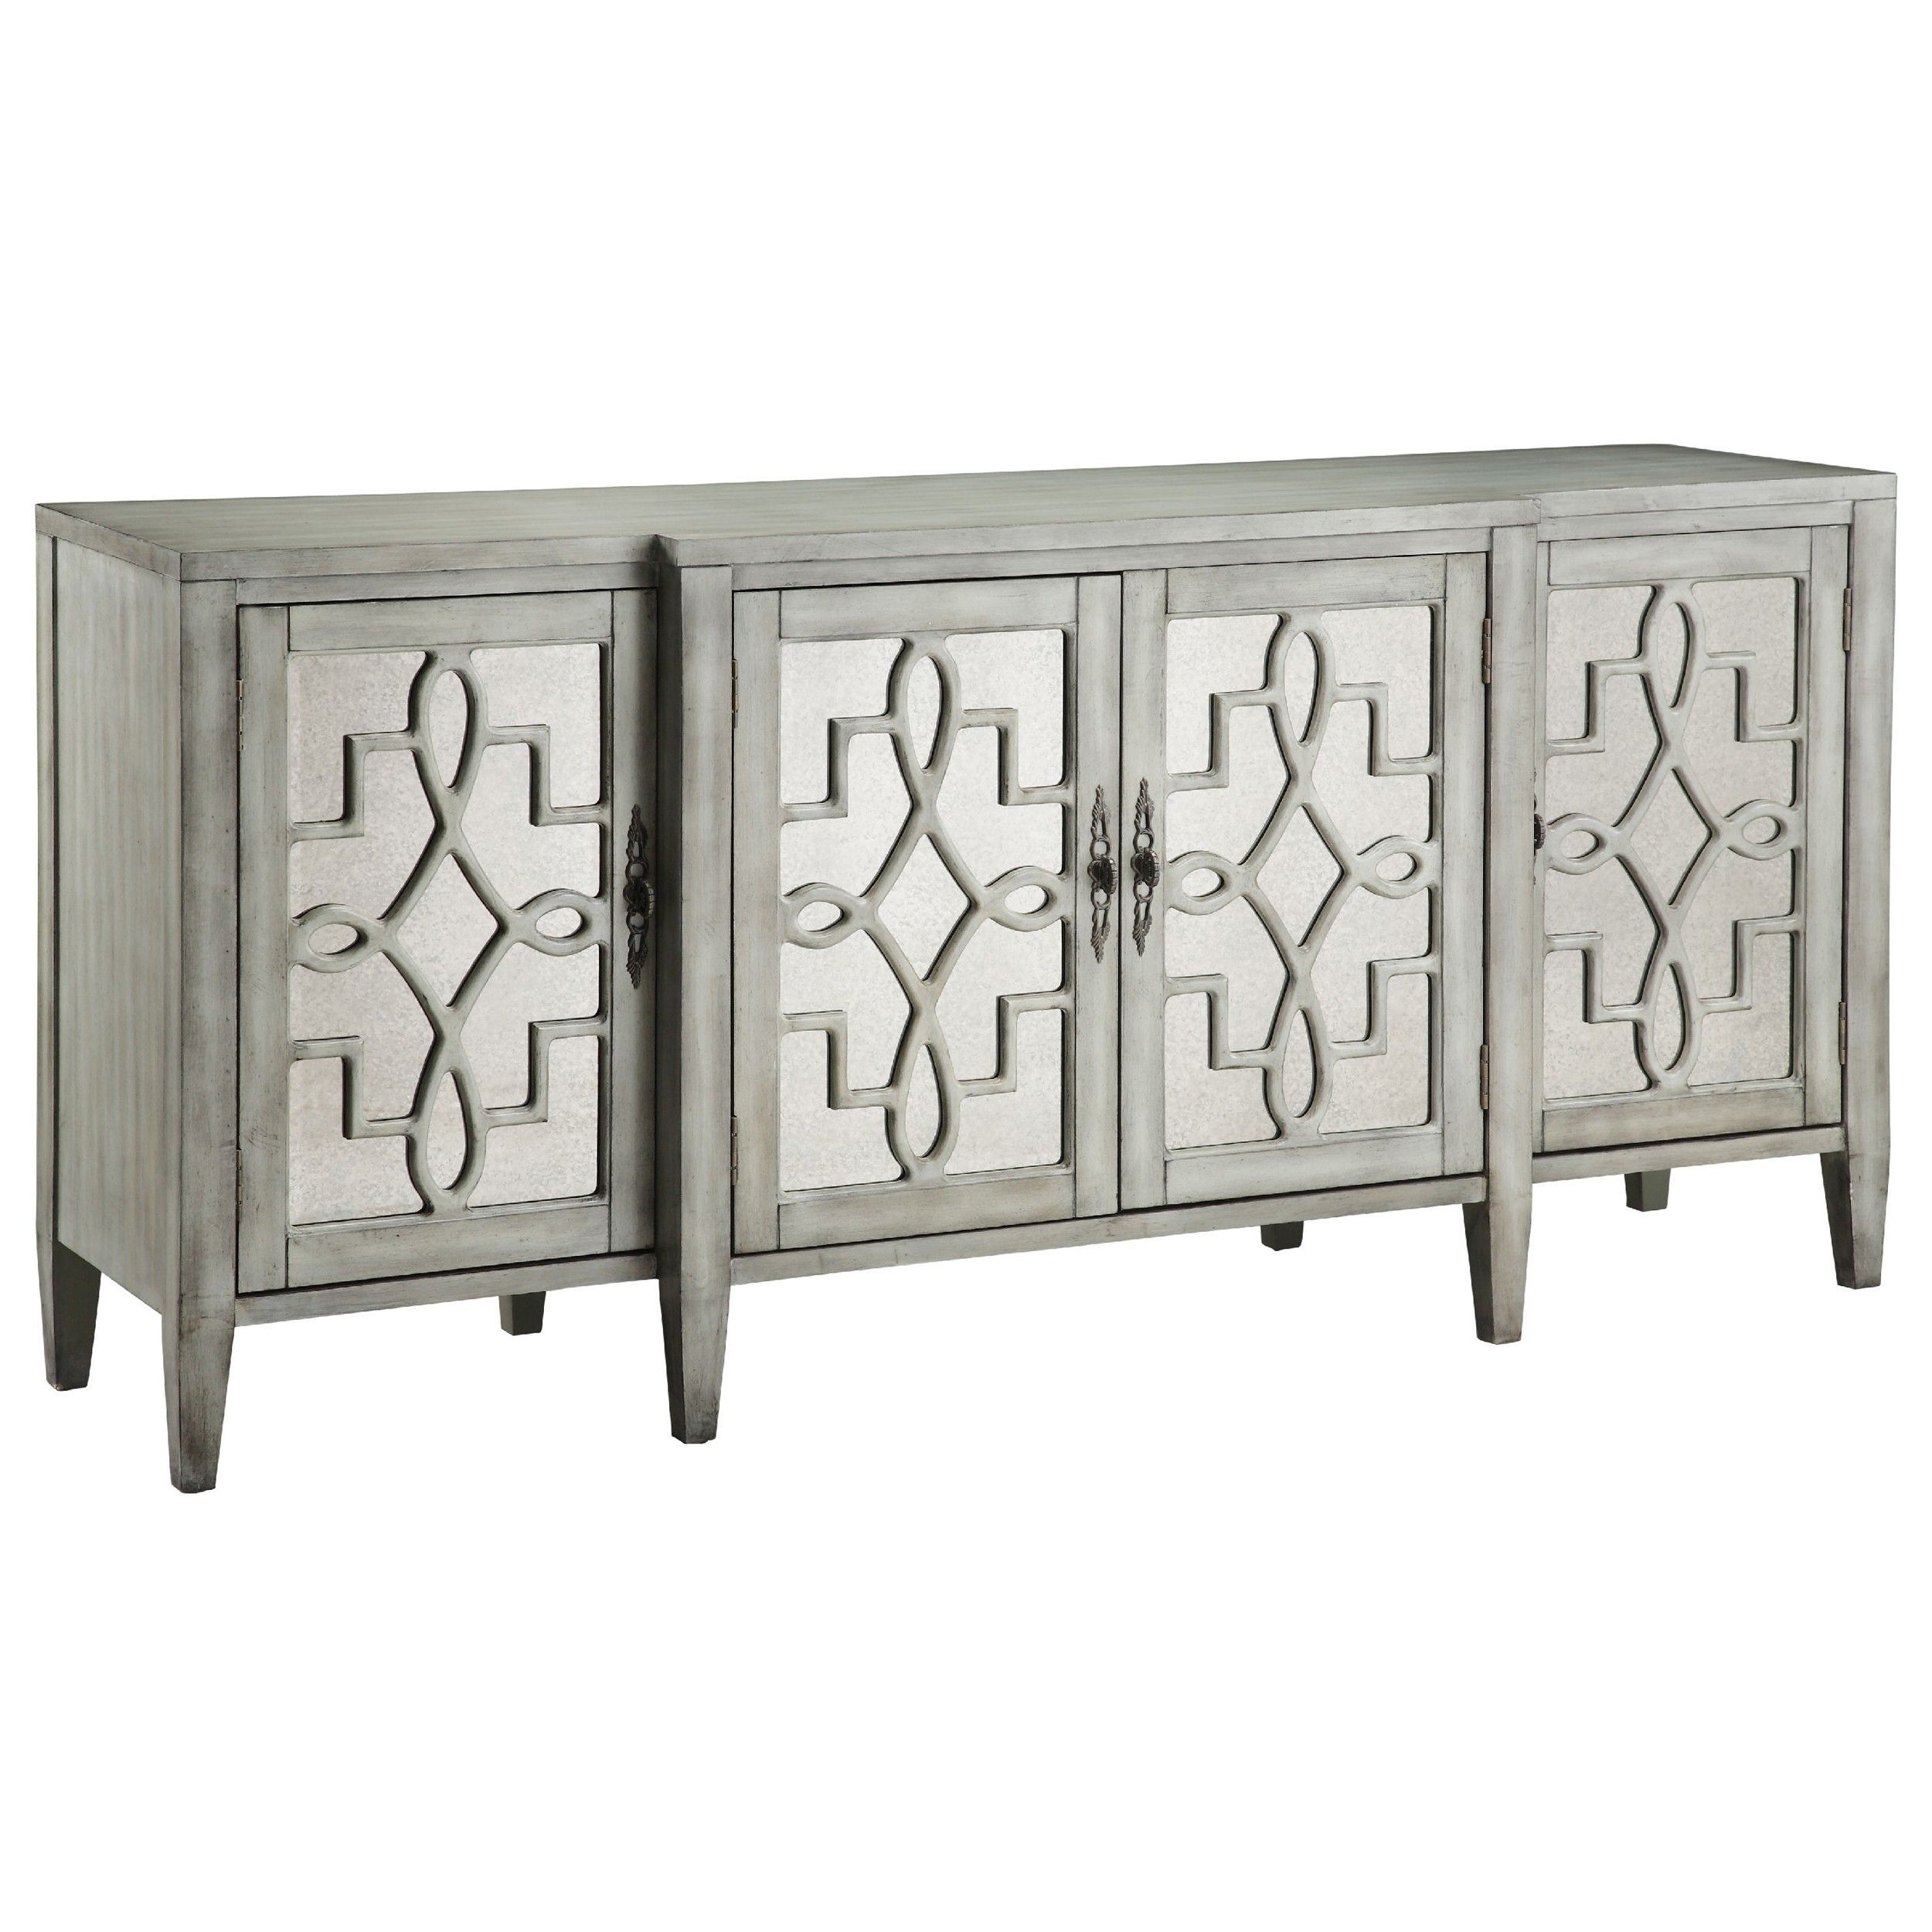 Isabelle Credenza | Furnishings | Pinterest | Credenza, Sideboard With 4 Door 4 Drawer Metal Inserts Sideboards (View 27 of 30)